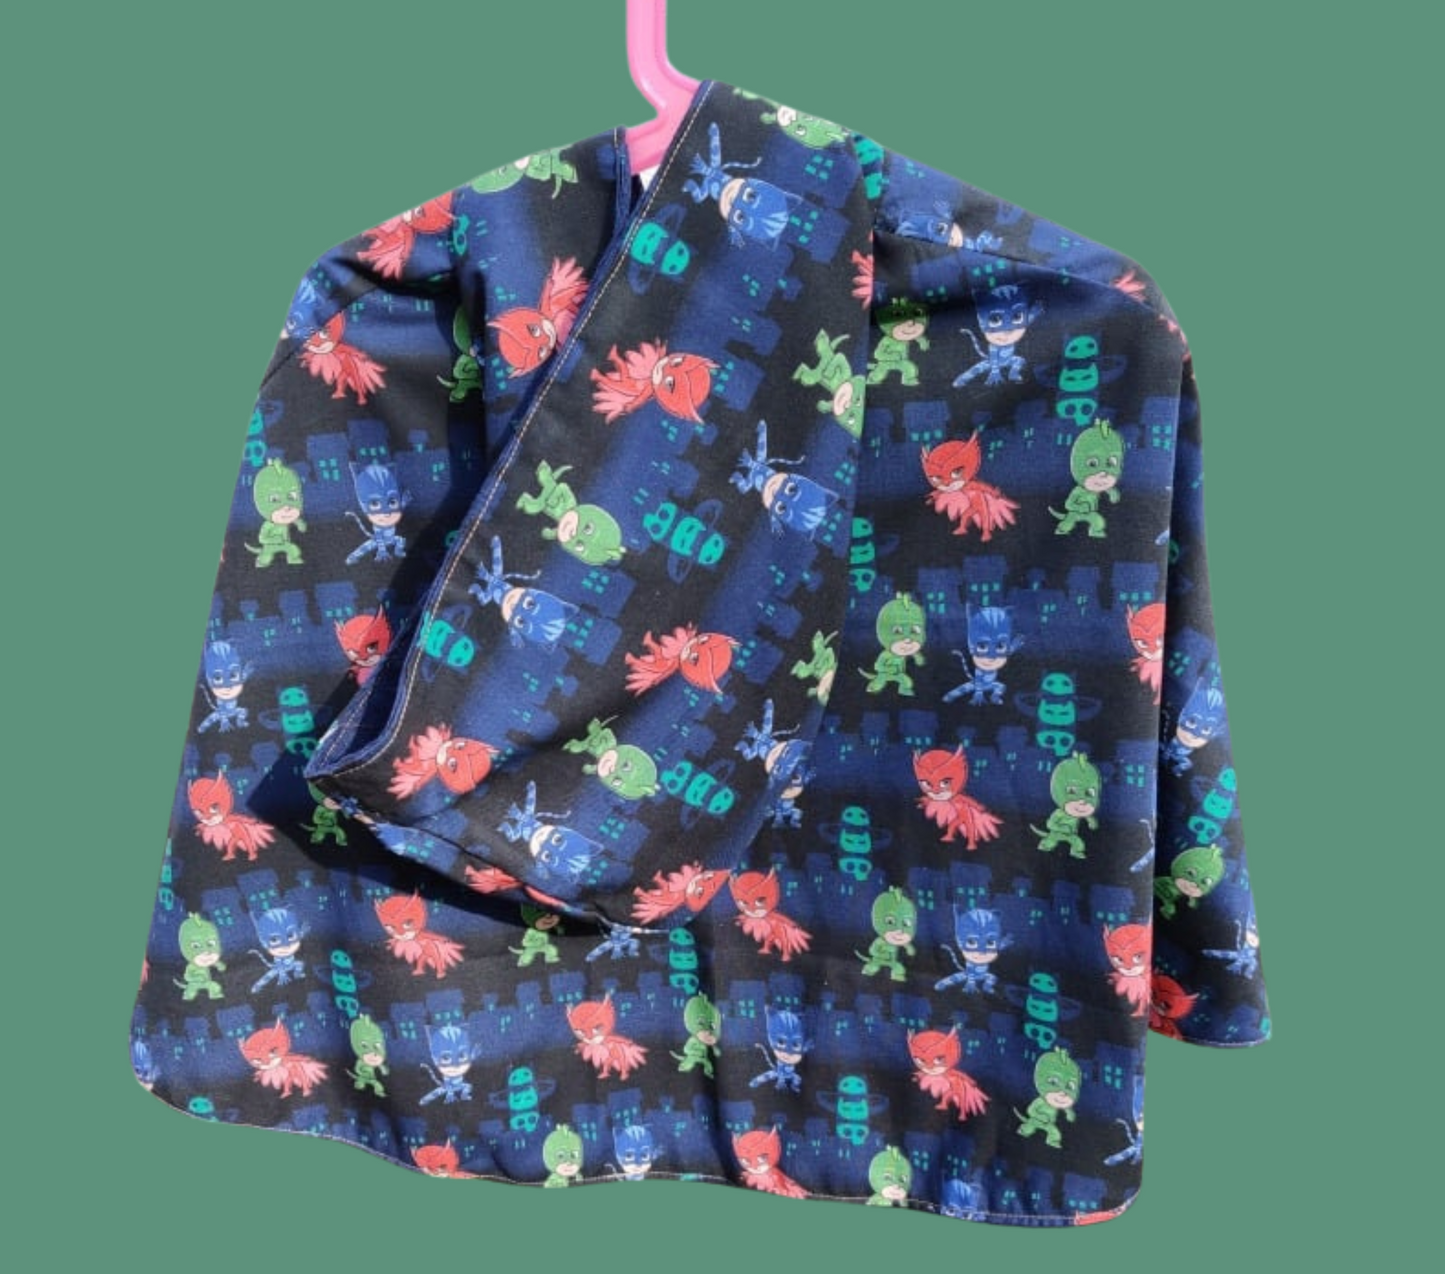 PJ Masks Heroes of the Night |  Reversible Hooded Poncho